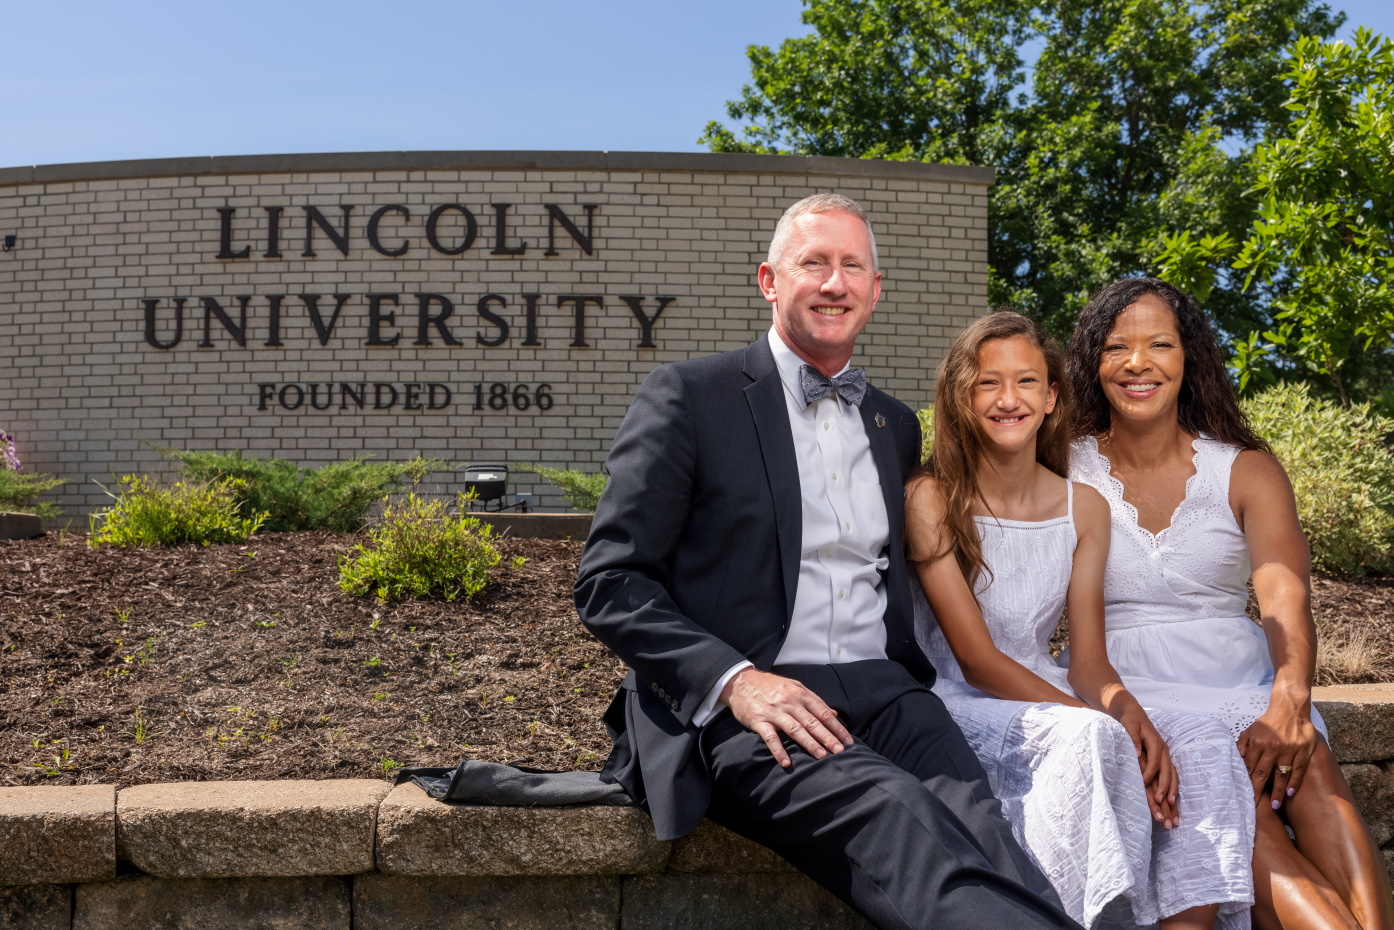 Dr. John B. Moseley was selected as LU's 21st President.